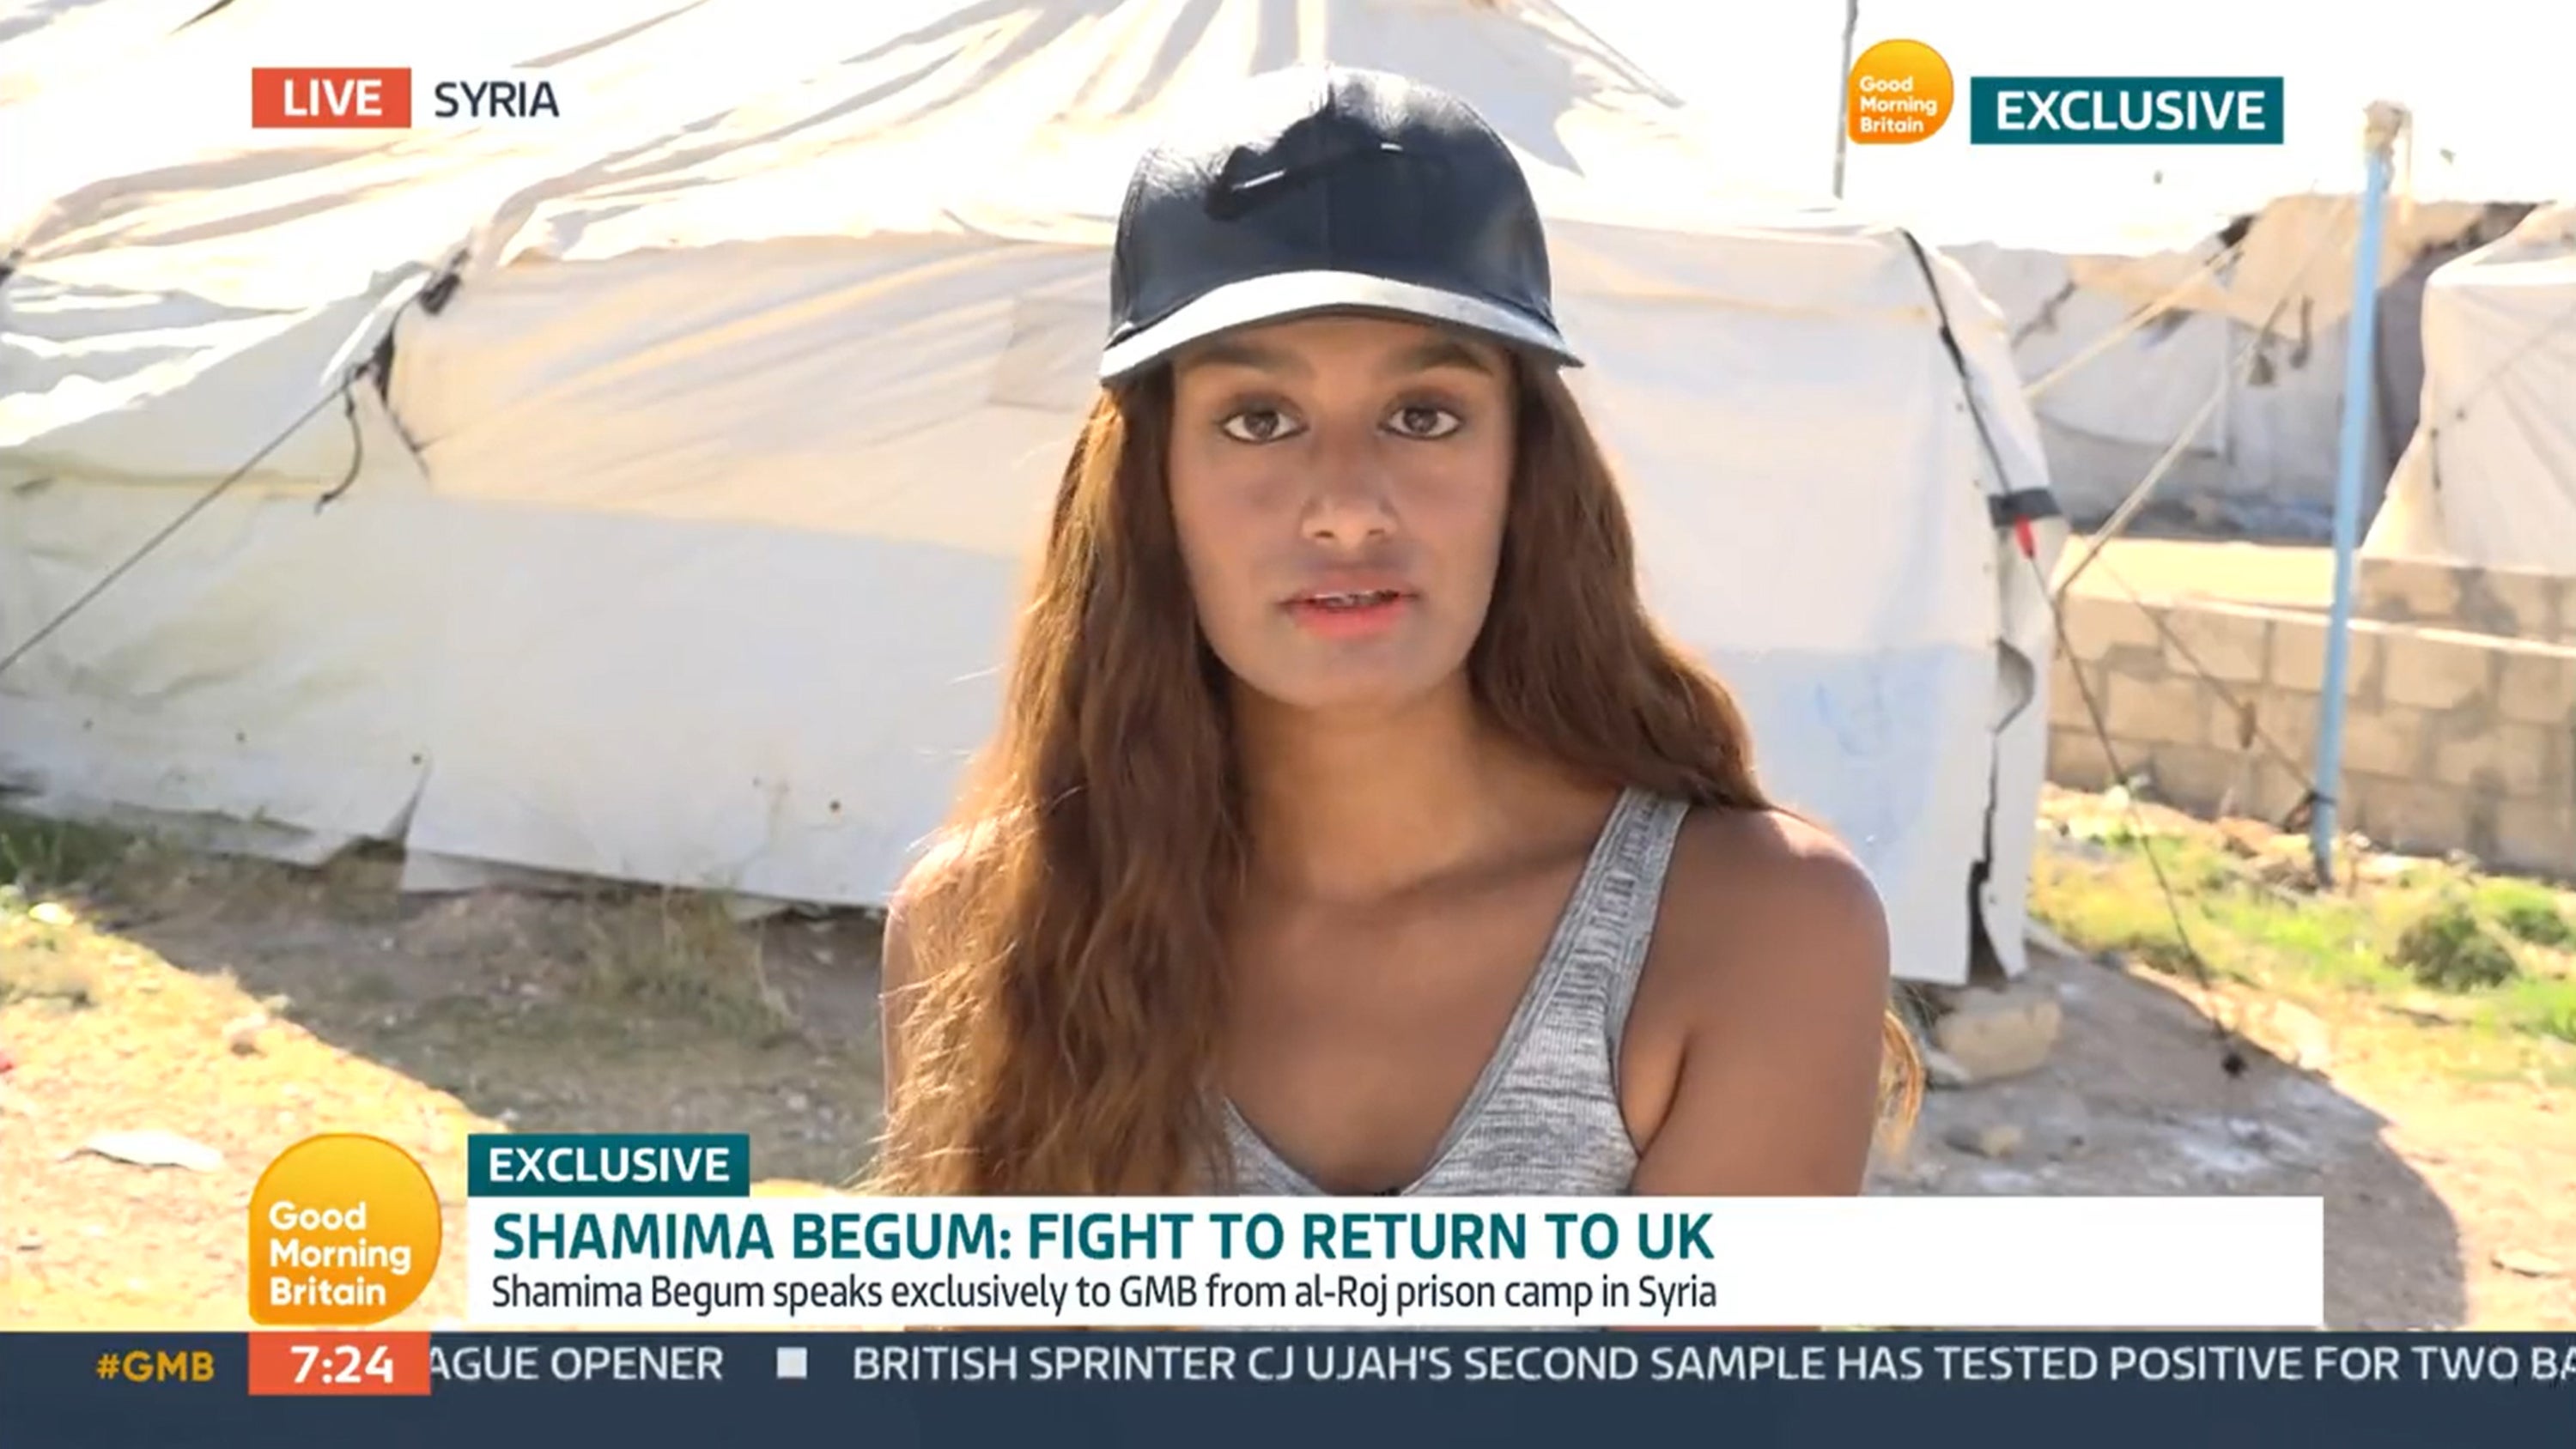 Video grab taken from ITV of Shamima Begum speaking to Good Morning Britain from the al-Roj prison camp in Syria